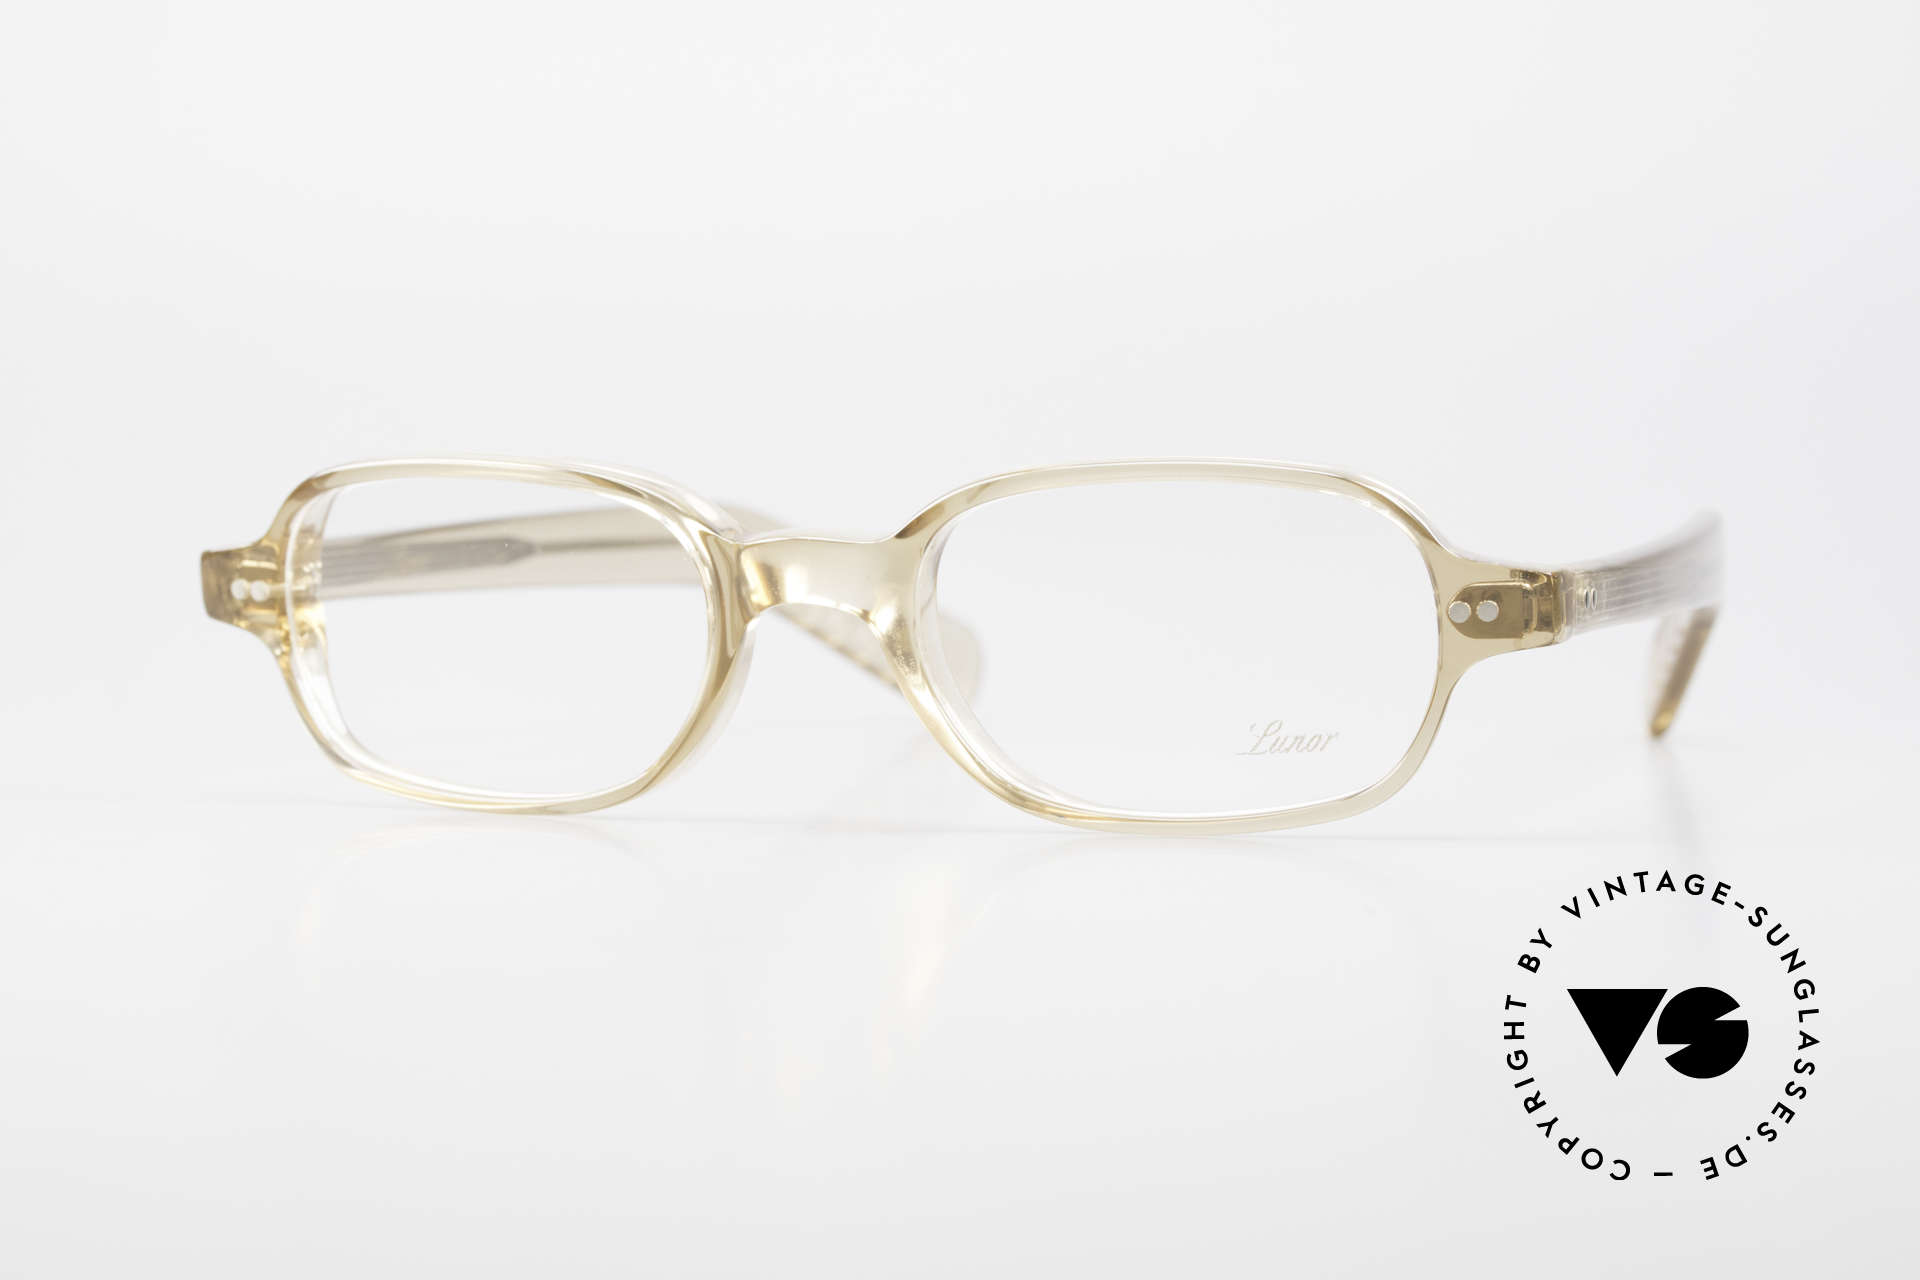 Lunor A56 Classic Lunor Acetate Glasses, A 56: classic Lunor glasses from the Acetate collection, Made for Men and Women